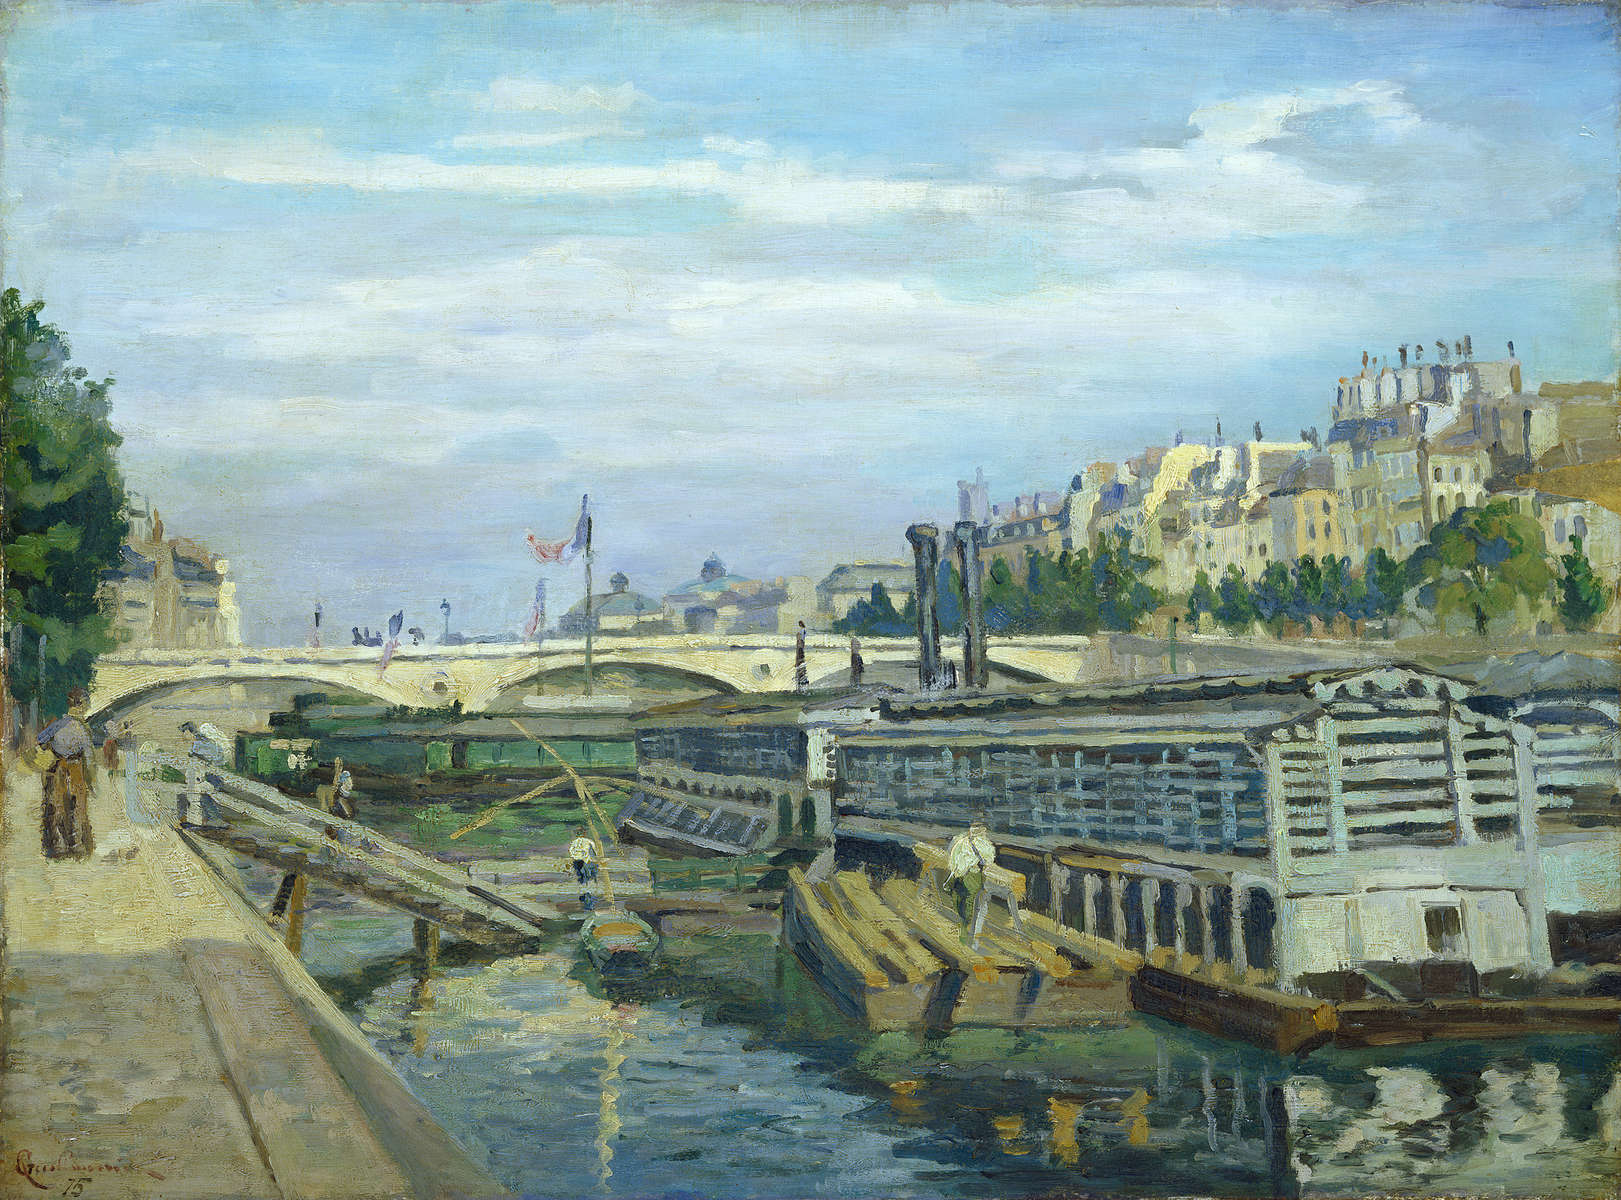 Jean-Baptiste-Armand Guillaumin (French, 1841 - 1927 ), The Bridge of Louis Philippe, 1875, oil on canvas, Chester Dale Collection